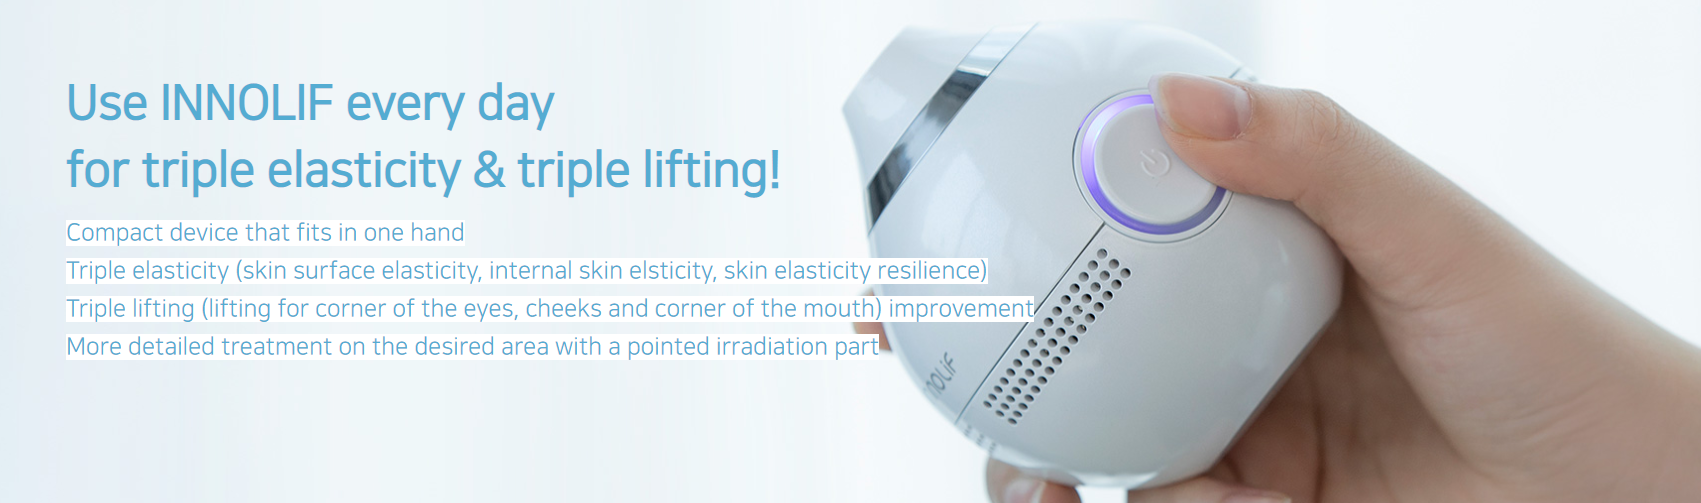 Use INNOLIF every day for triple elasticity & lifting!